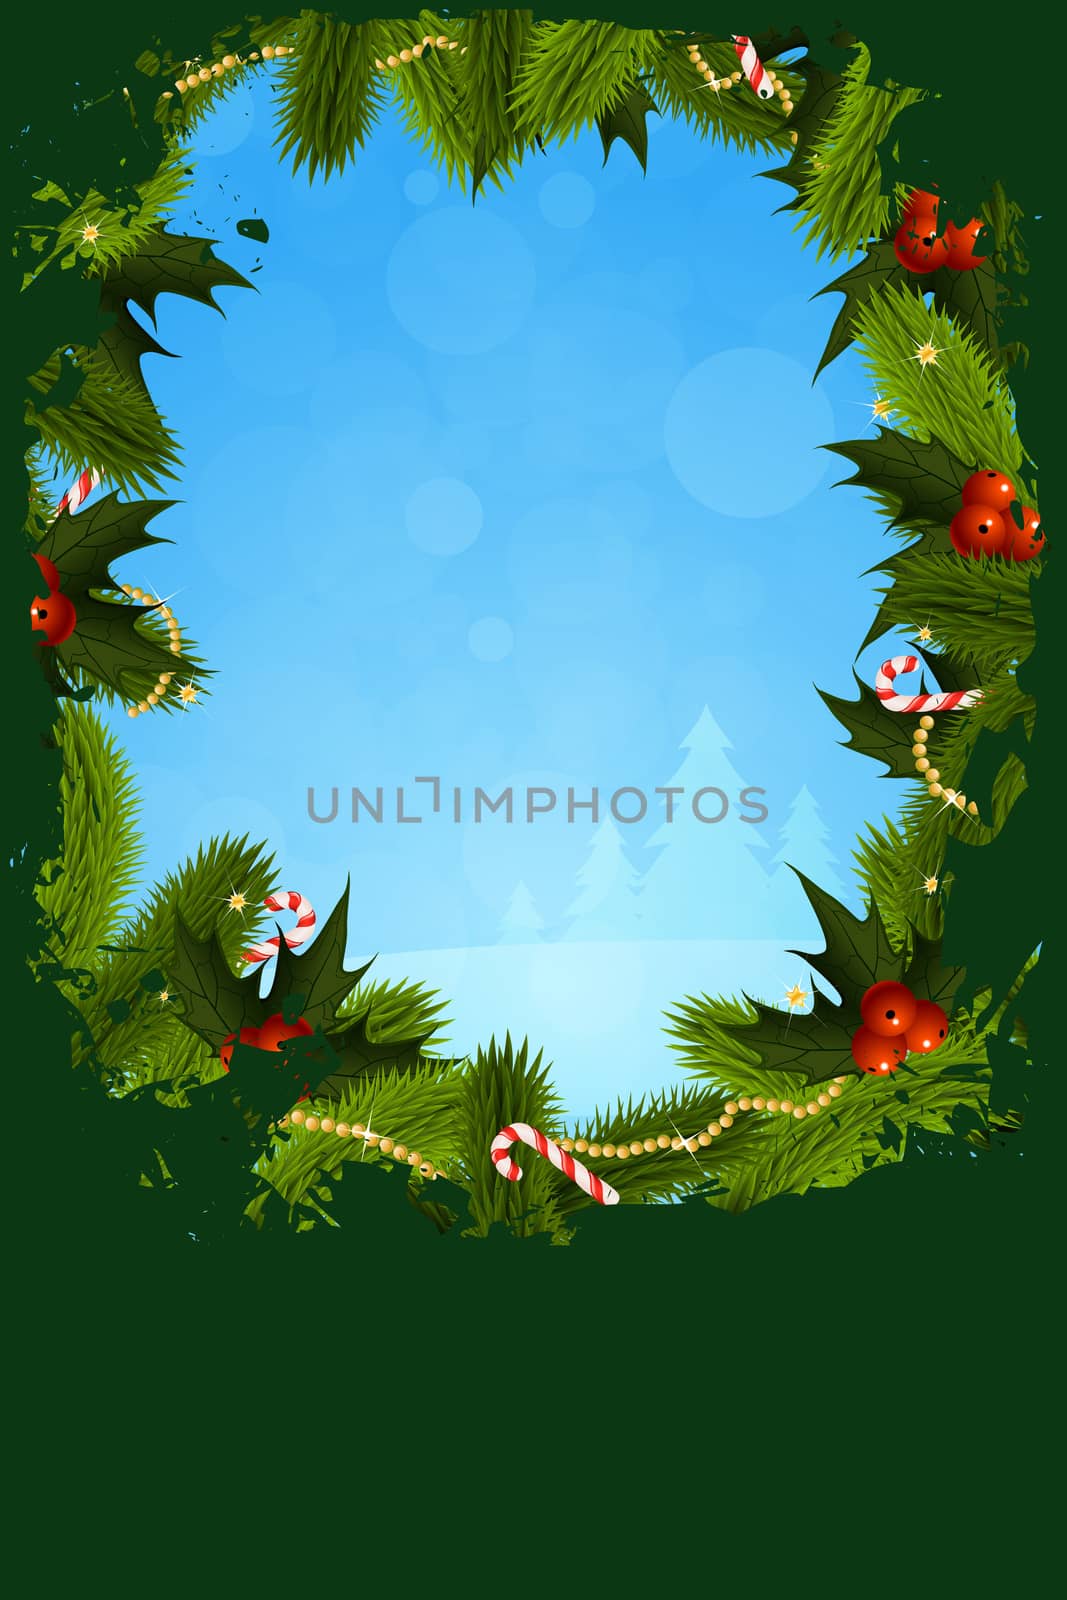 Grungy Christmas Greeting Card with Christmas Decorations